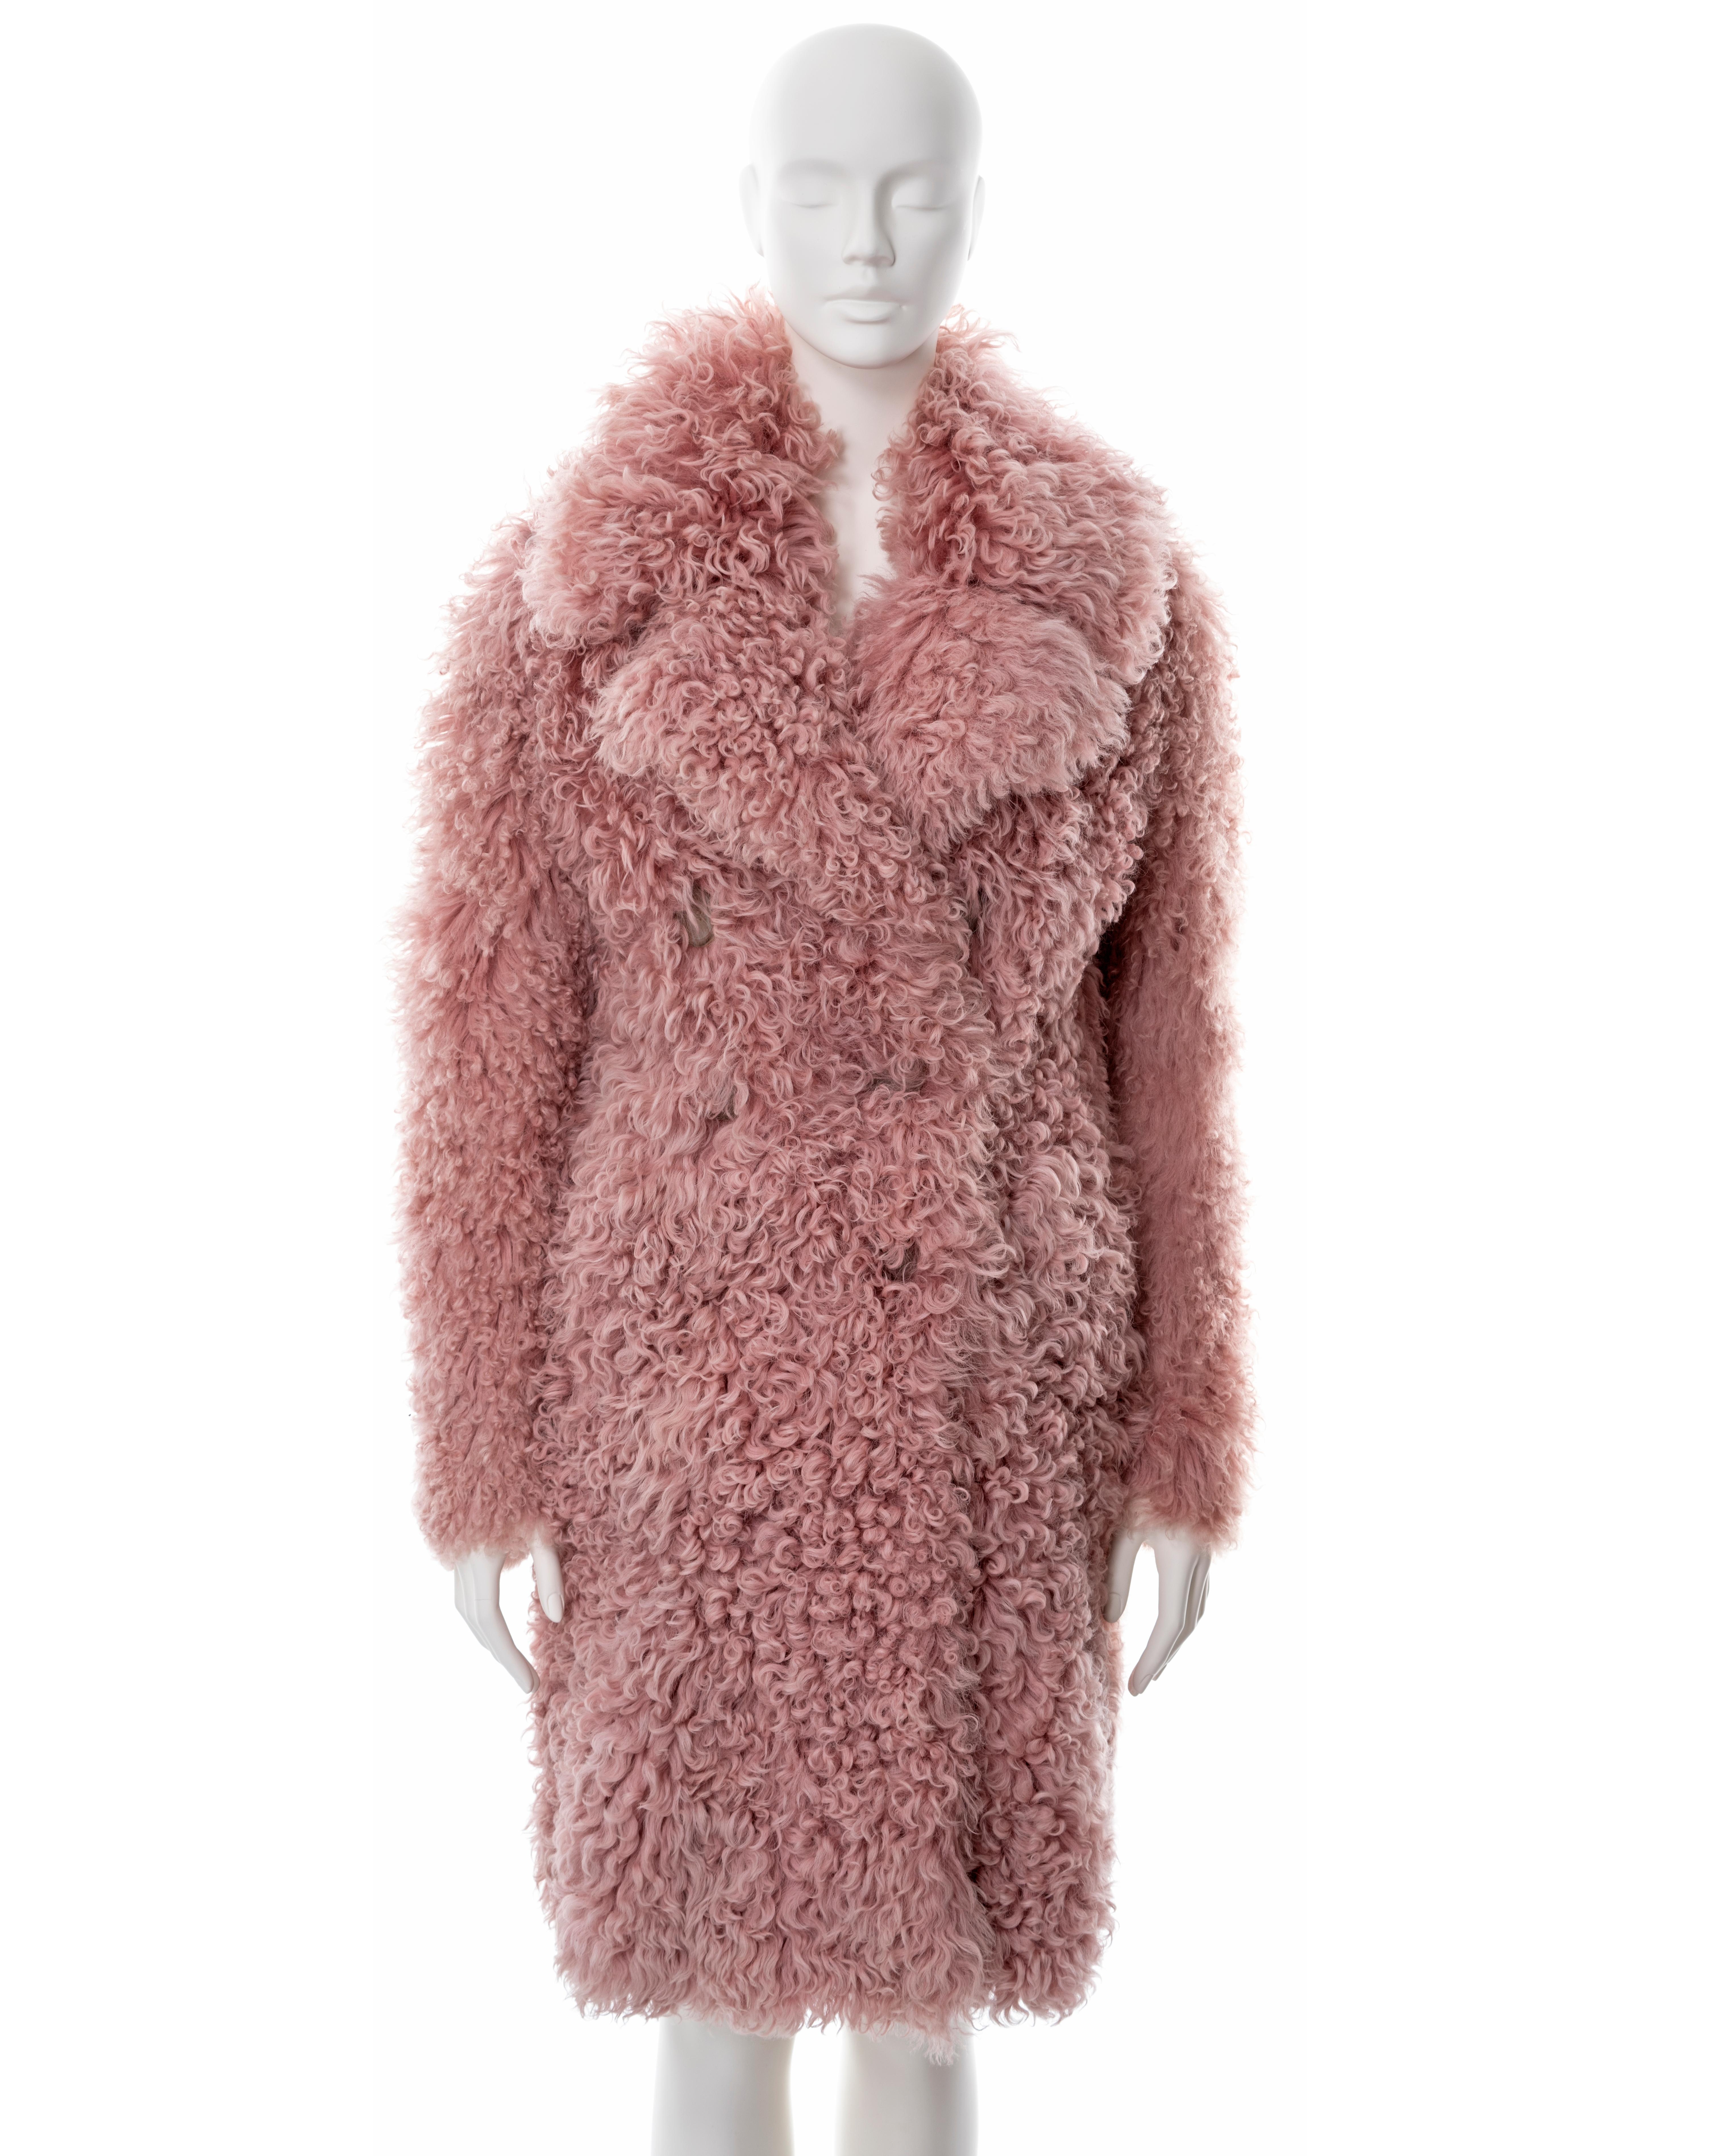 ▪ Gucci pink curly shearling coat 
▪ Fall-Winter 2014
▪ Sold by One of a Kind Archive
▪ Double-breasted 
▪ Black leather interior 
▪ Large collar 
▪ Size approx. Small 
▪ Made in Italy 

All photographs in this listing EXCLUDING any reference or